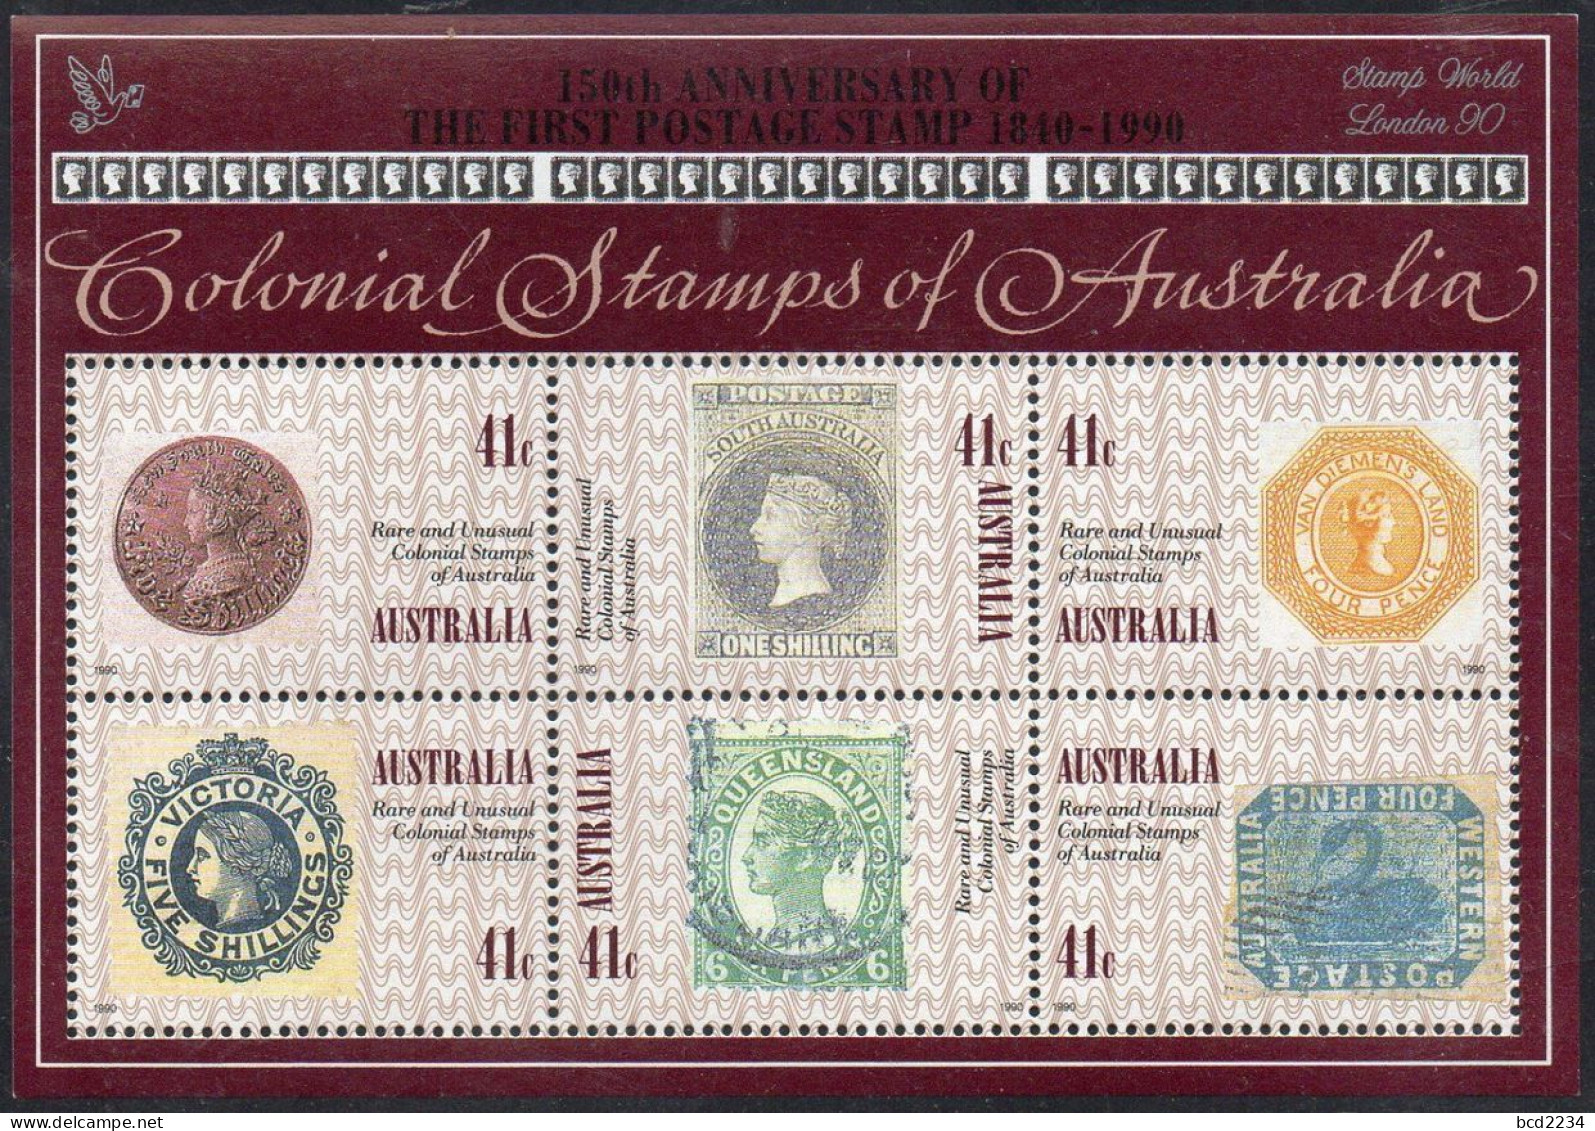 AUSTRALIA 1990 RARE & UNUSUAL COLONIAL STAMPS X5 + SILVER STAMP WORLD LONDON 90 OVERPRINT SG MS1253 Mi BL 10 MNH - Mint Stamps